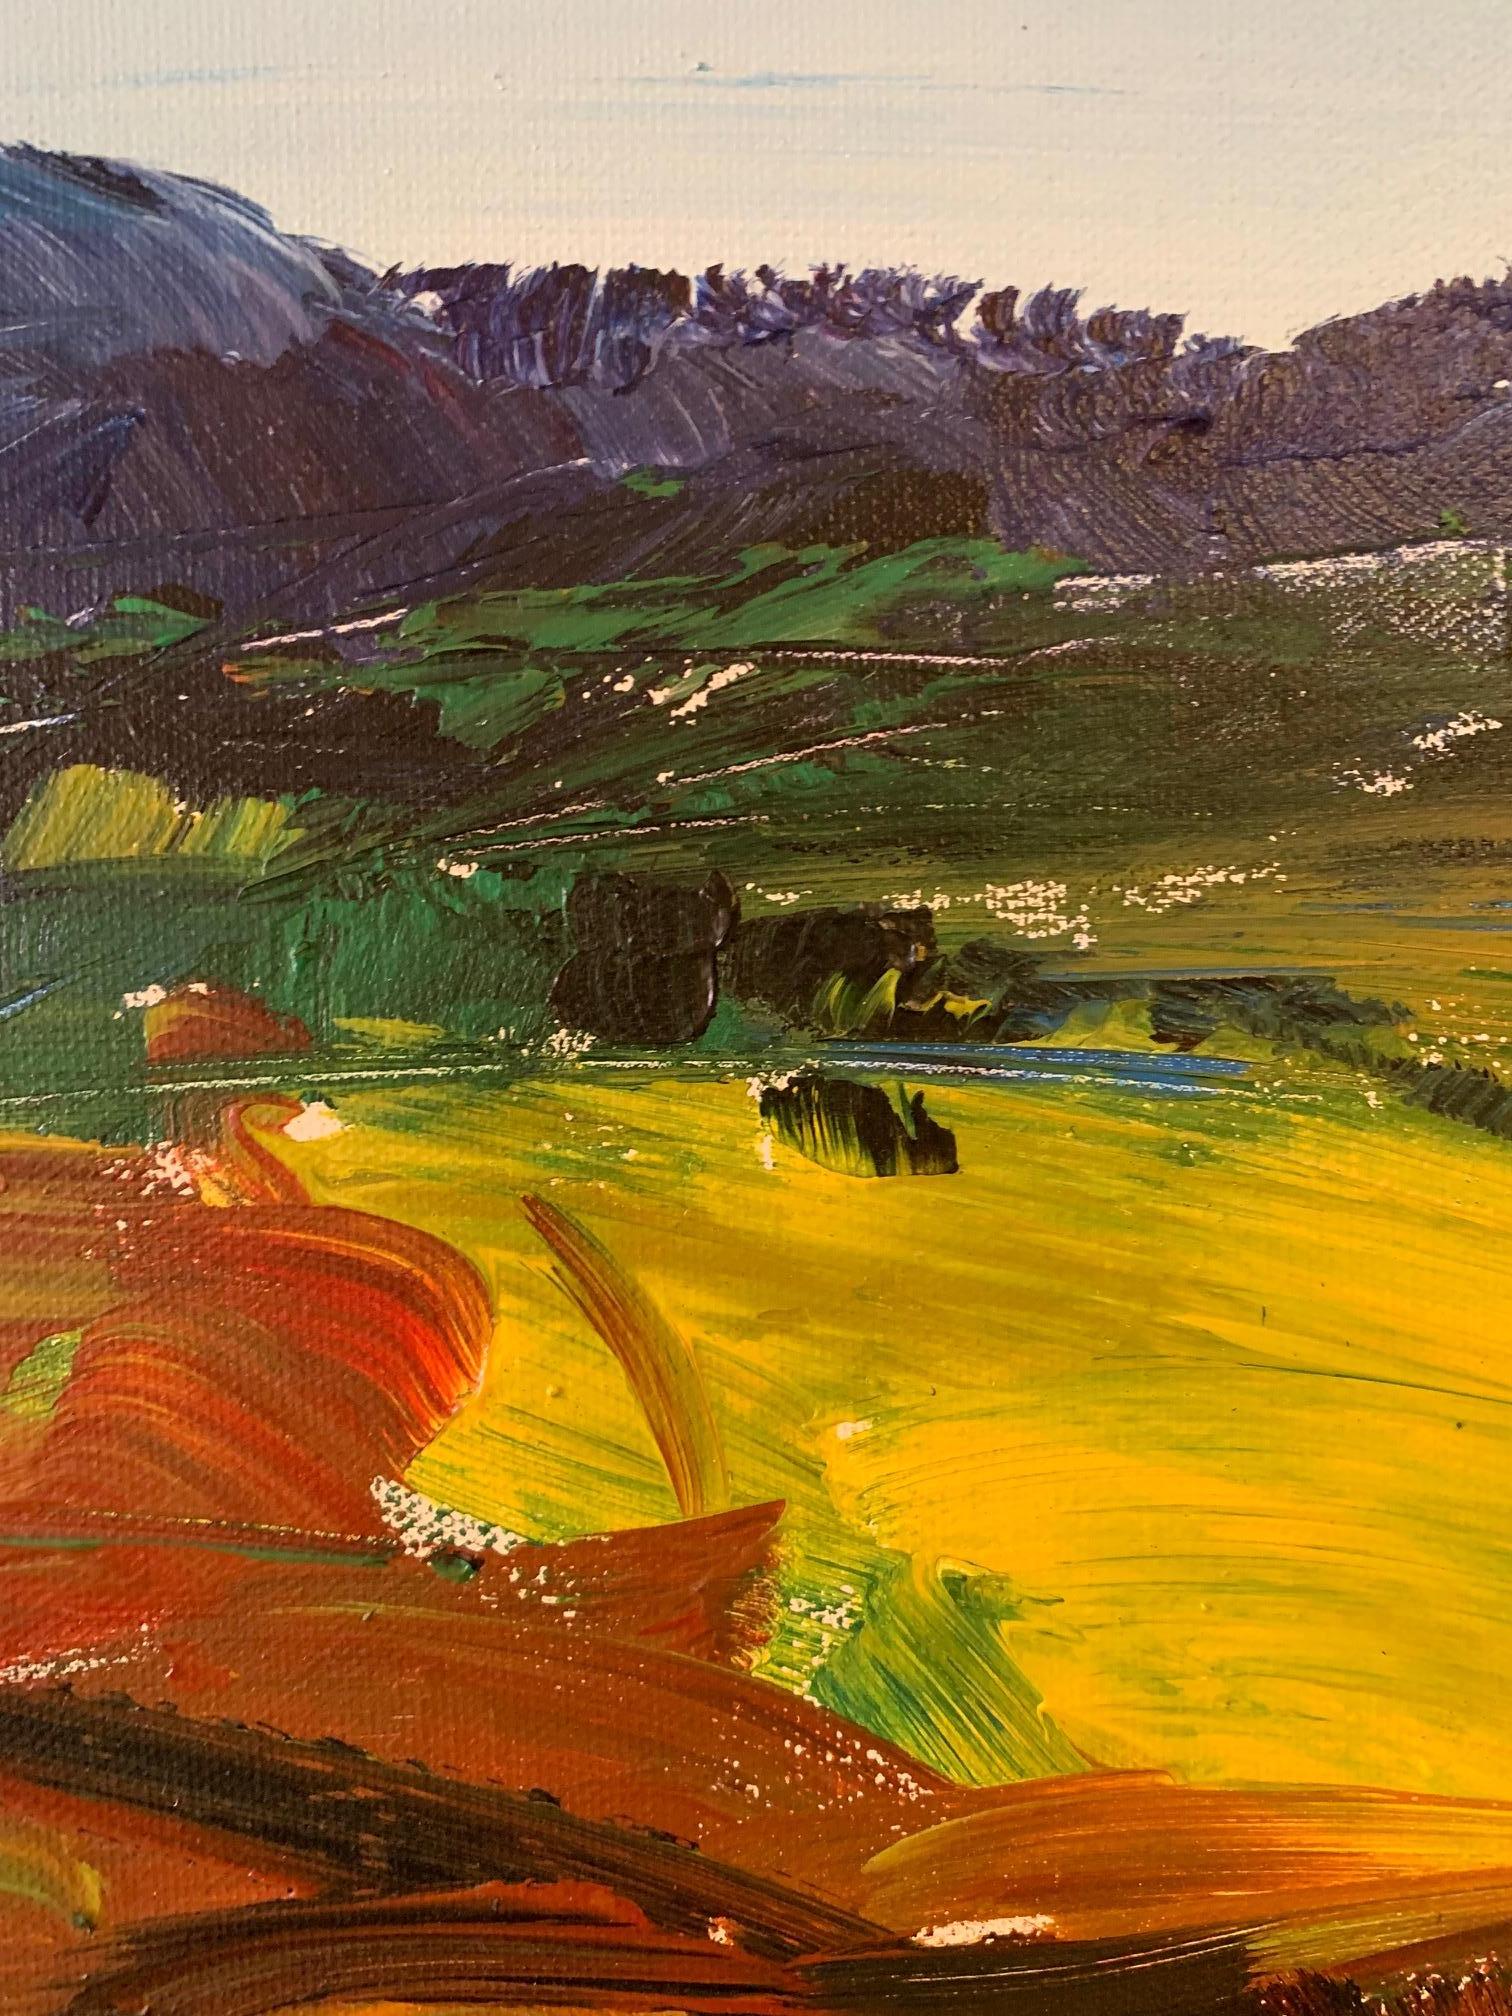 'Green And Yellow Horizon ' oil on canvas by Masri - Expressionist Painting by Masri Hayssam